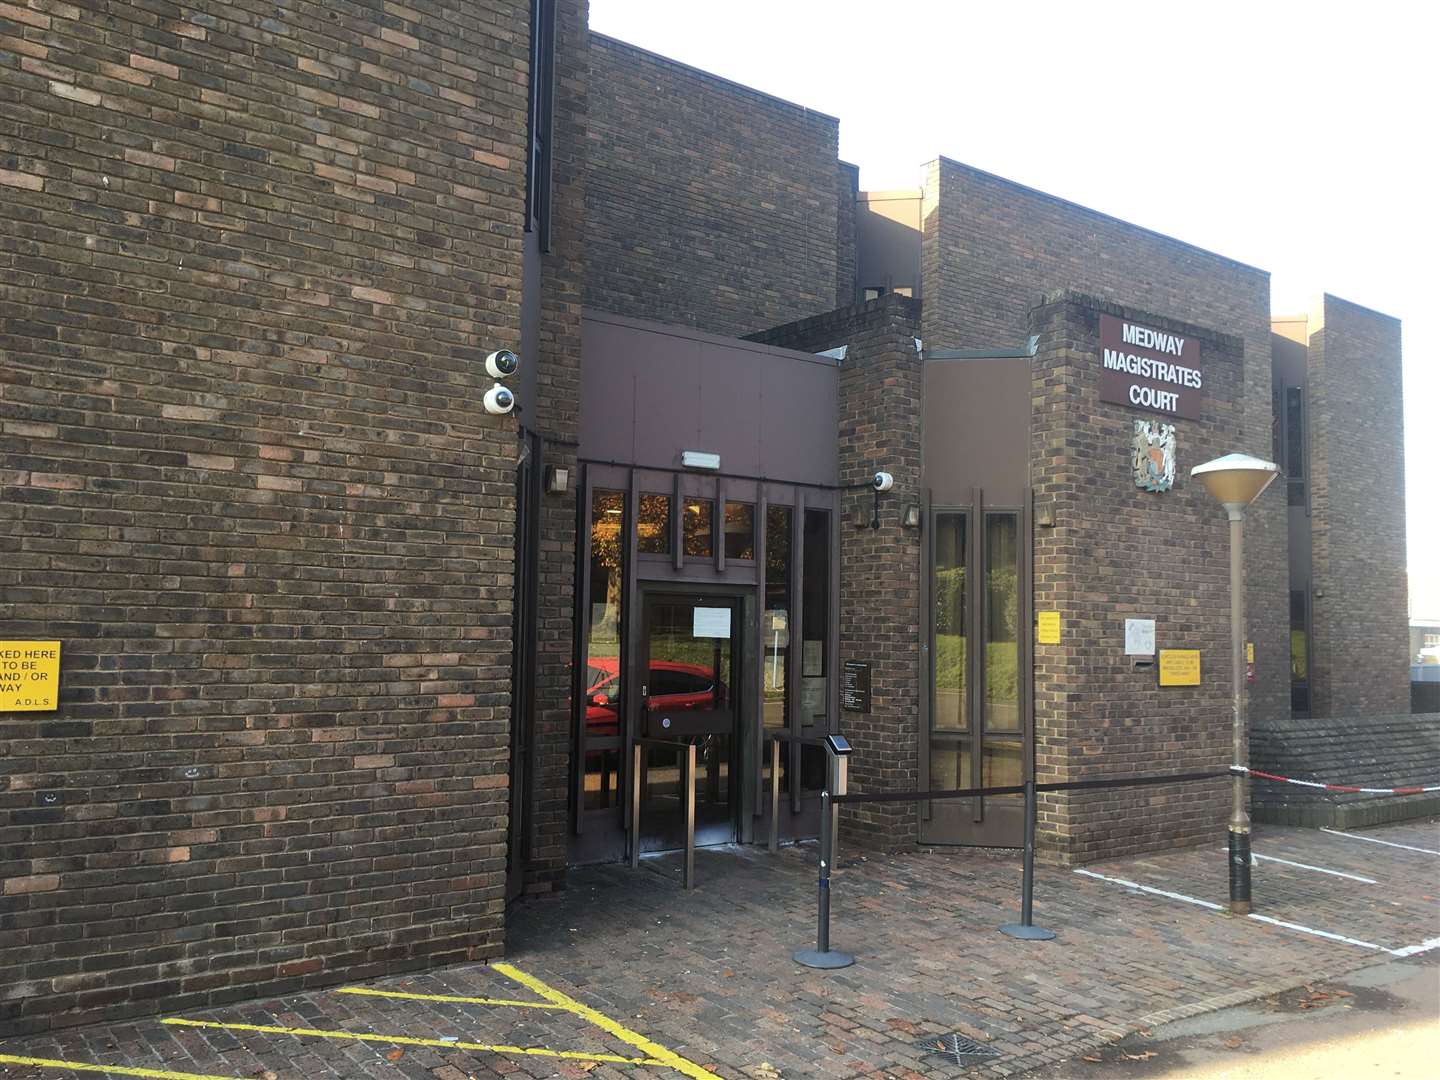 The case was heard at Medway Magistrates Court